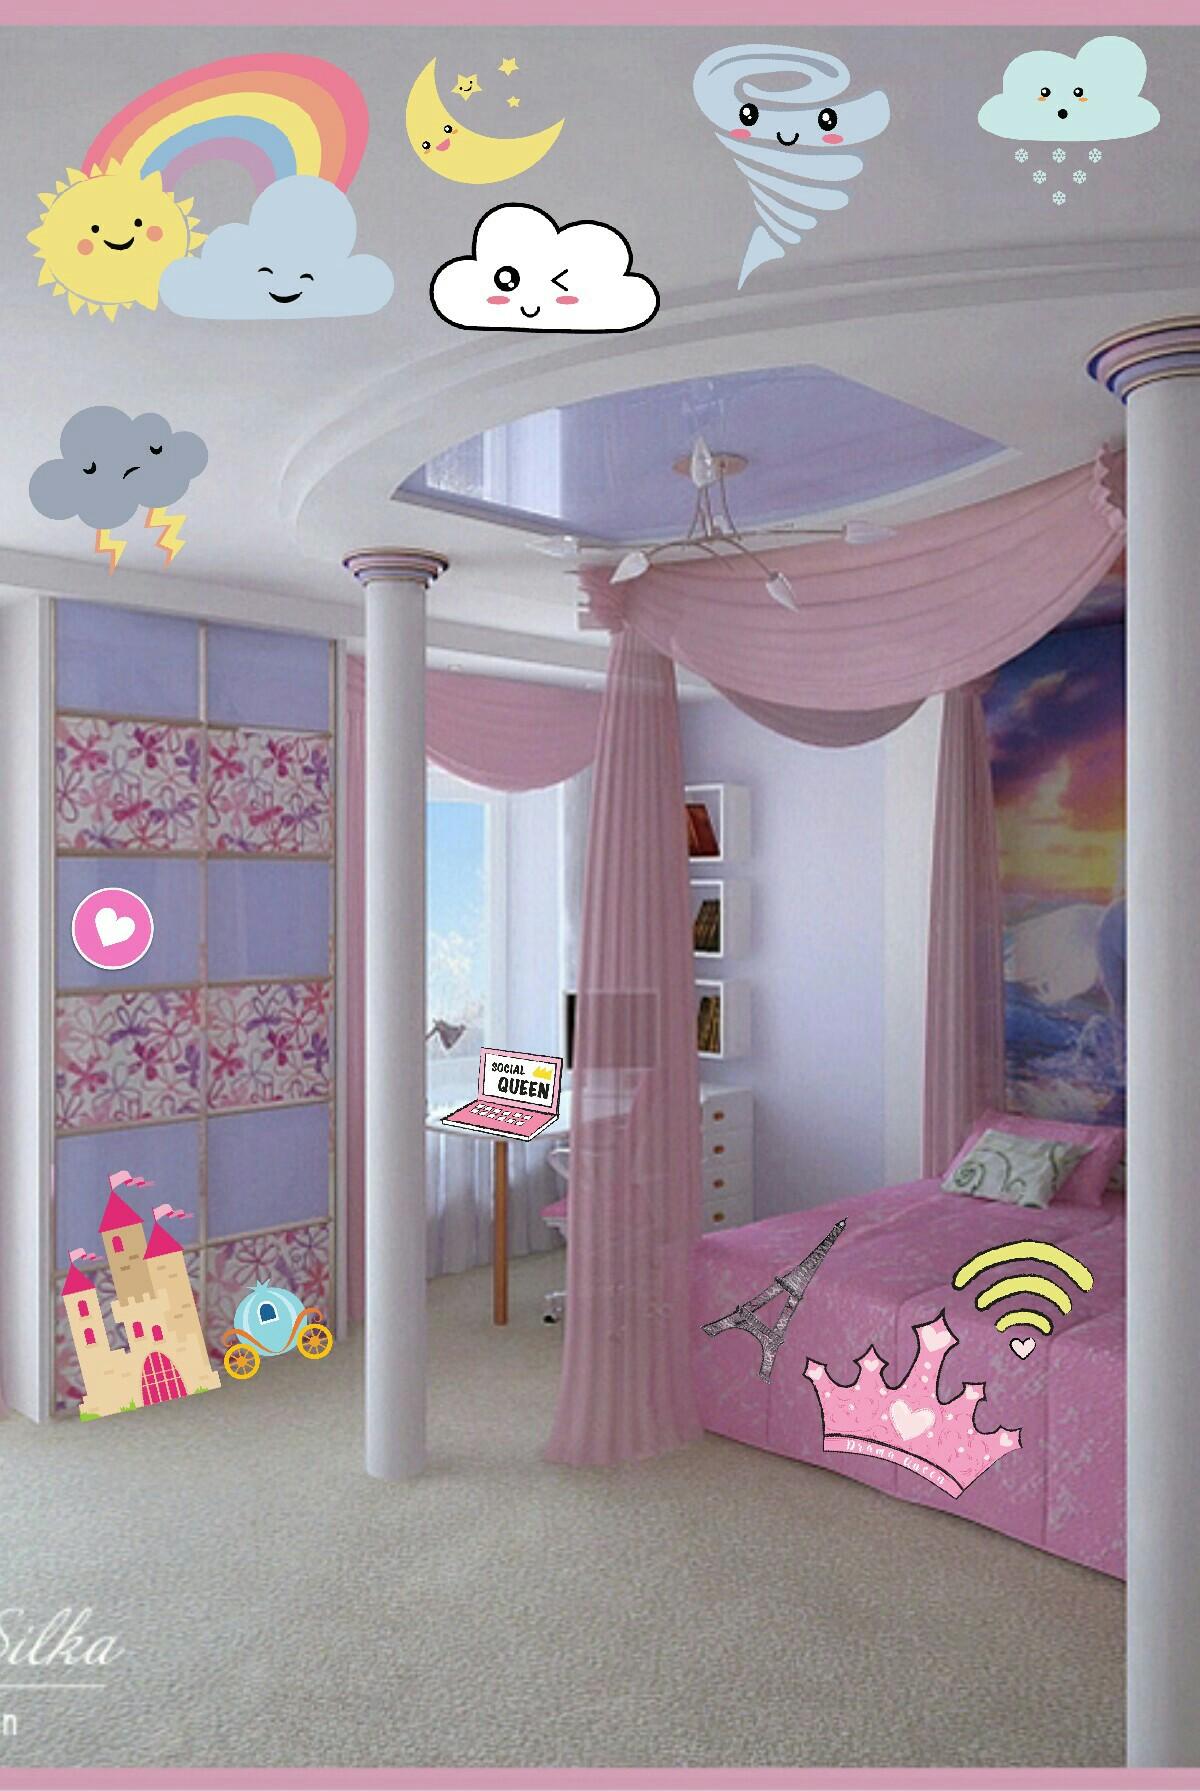 Welcome to your new room!!!